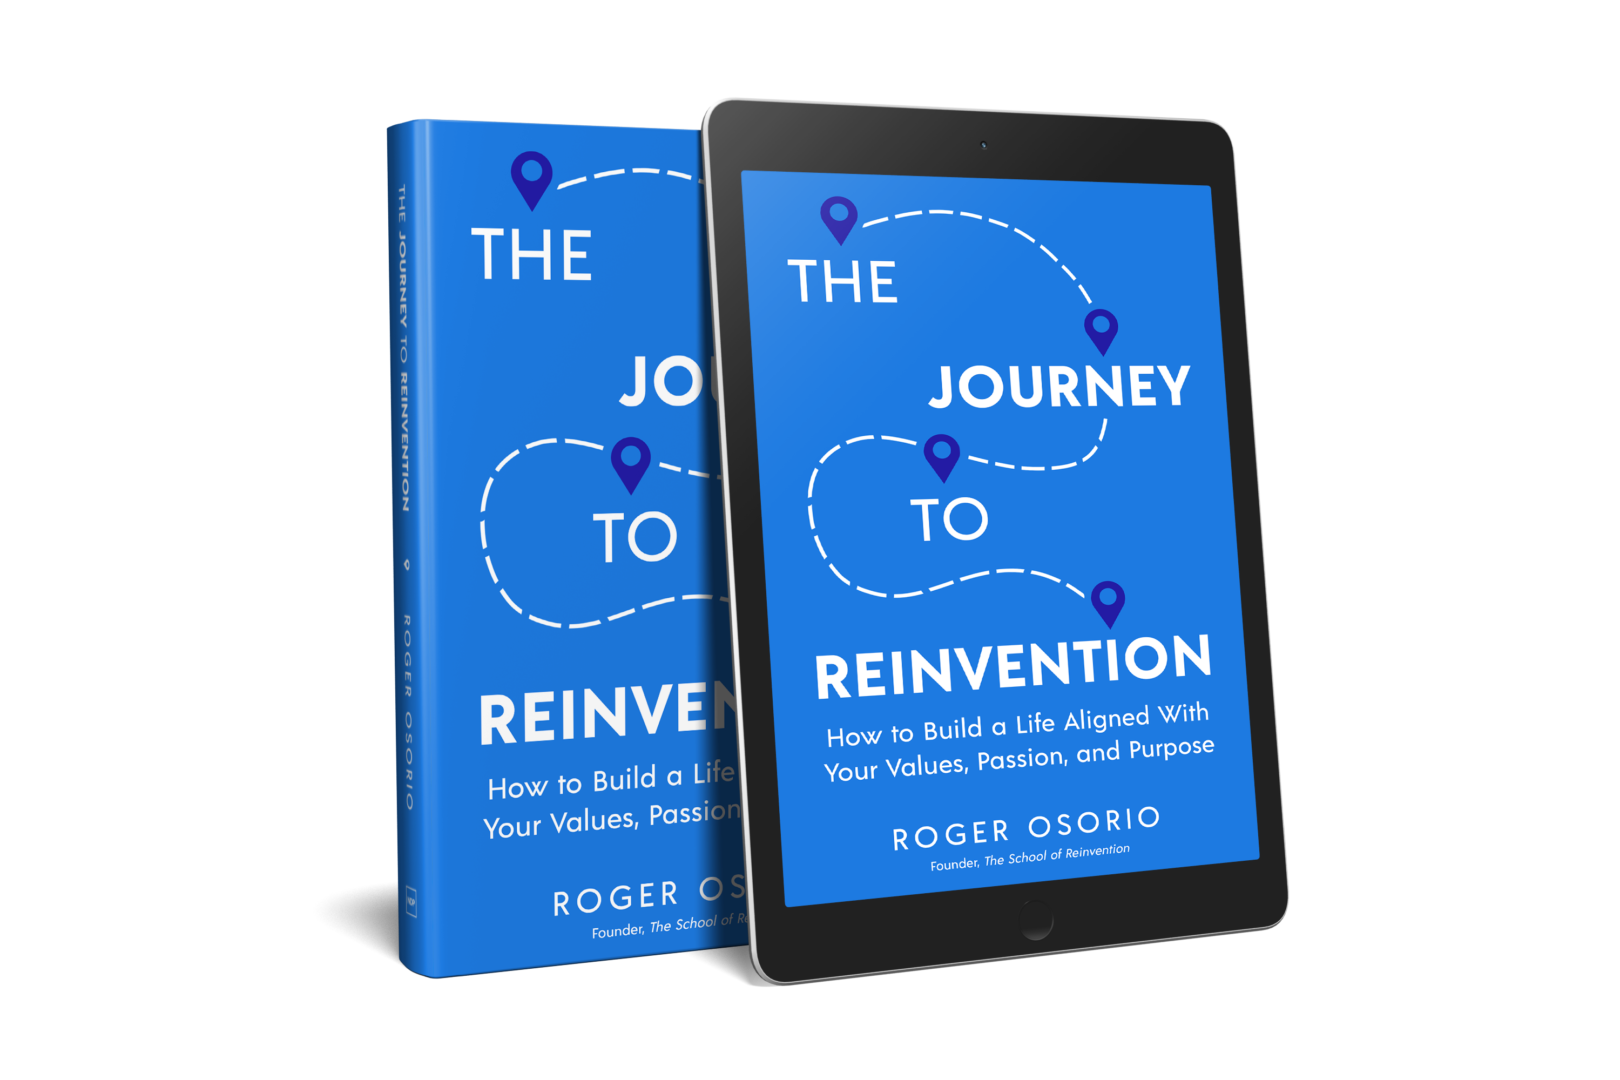 The Journey to Reinvention book and e-book